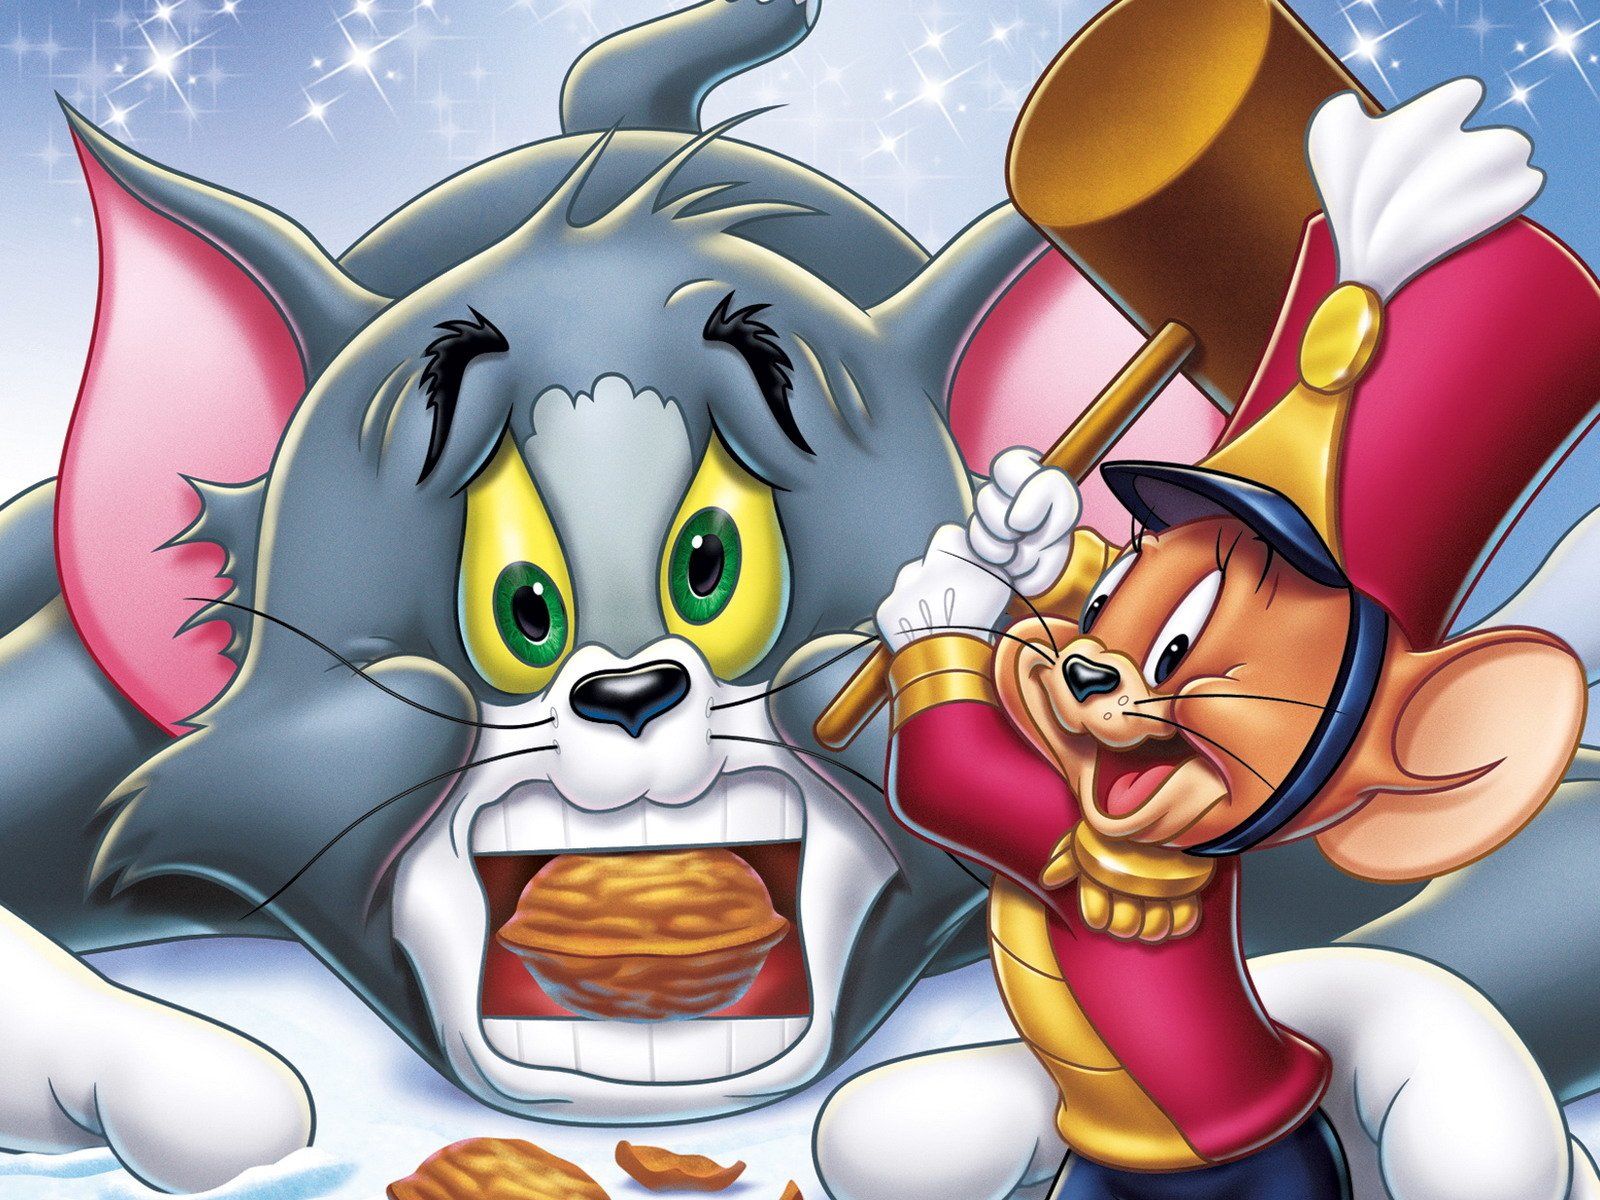 Tom And Jerry 2021 Wallpapers